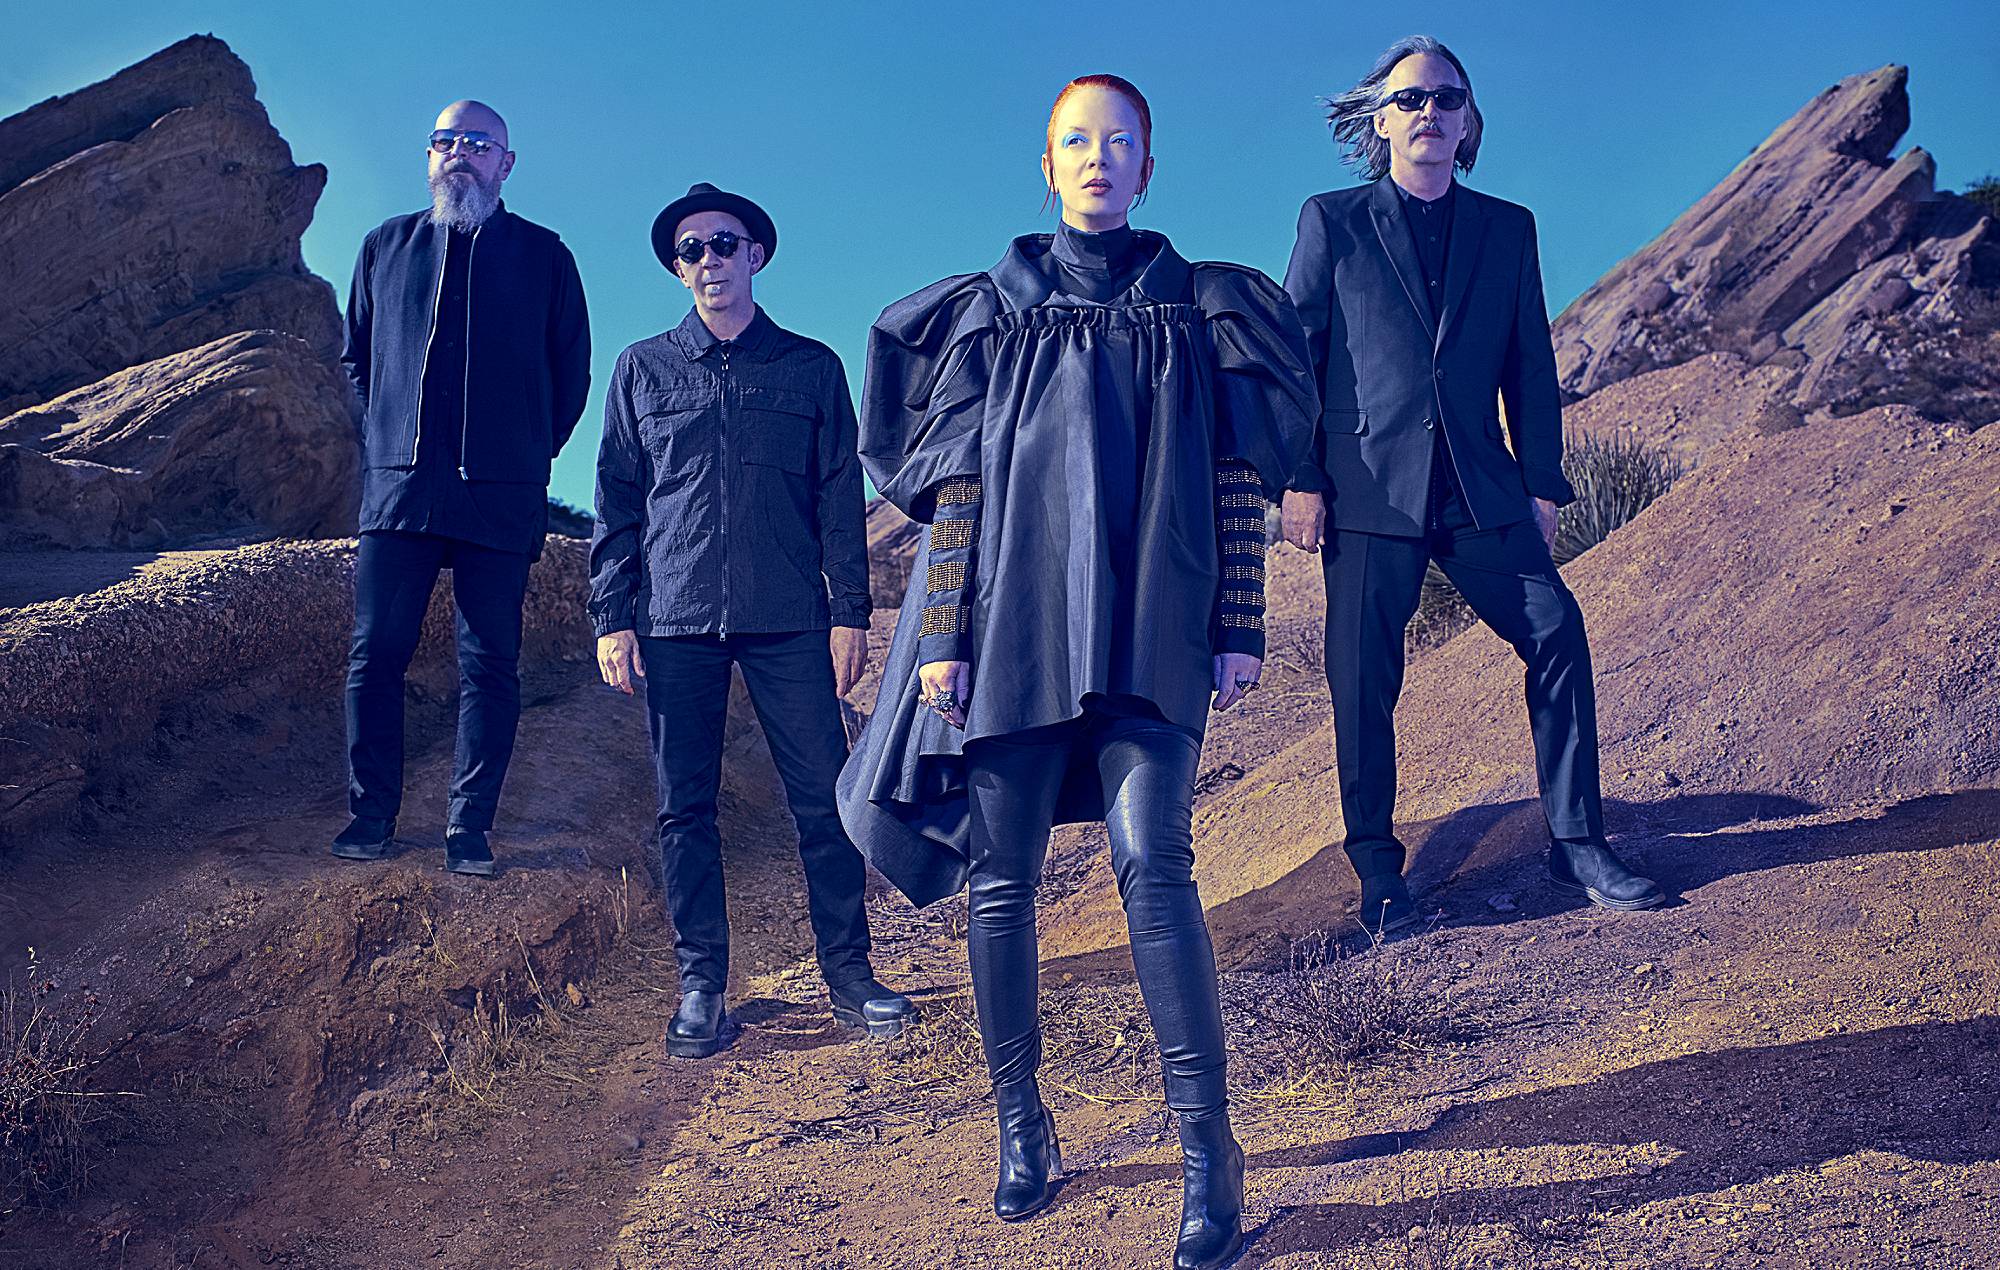 Garbage: “If you’re as successful as we were in the ‘90s, that is a burden”